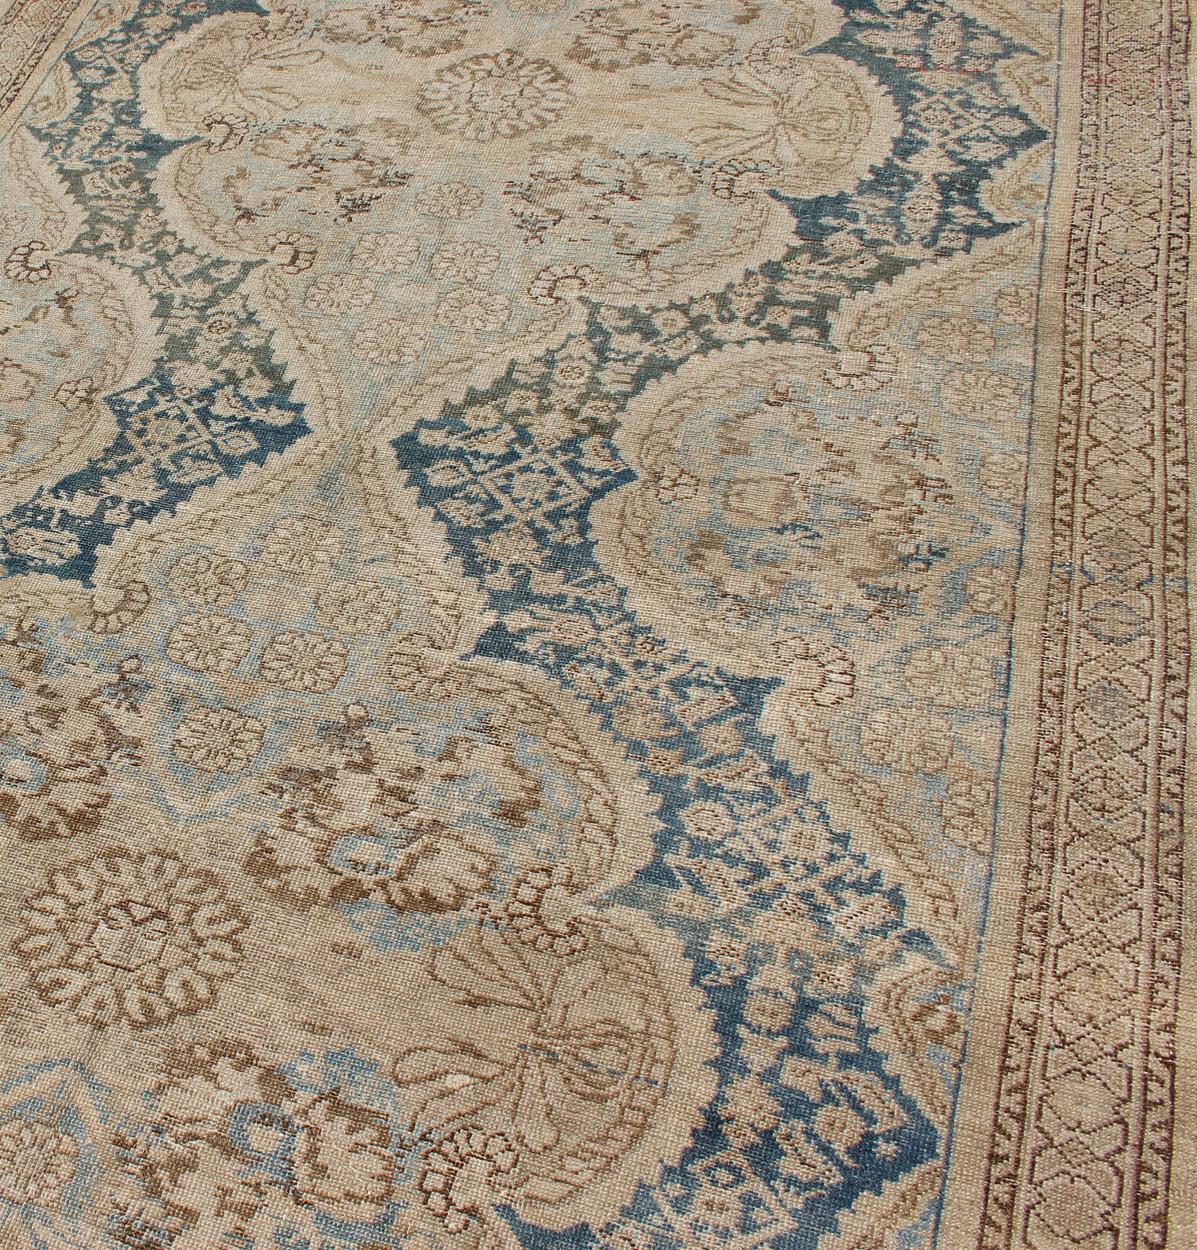 Wool Blue and Brown Antique Persian Malayer Short Gallery Rug with Floral Medallions